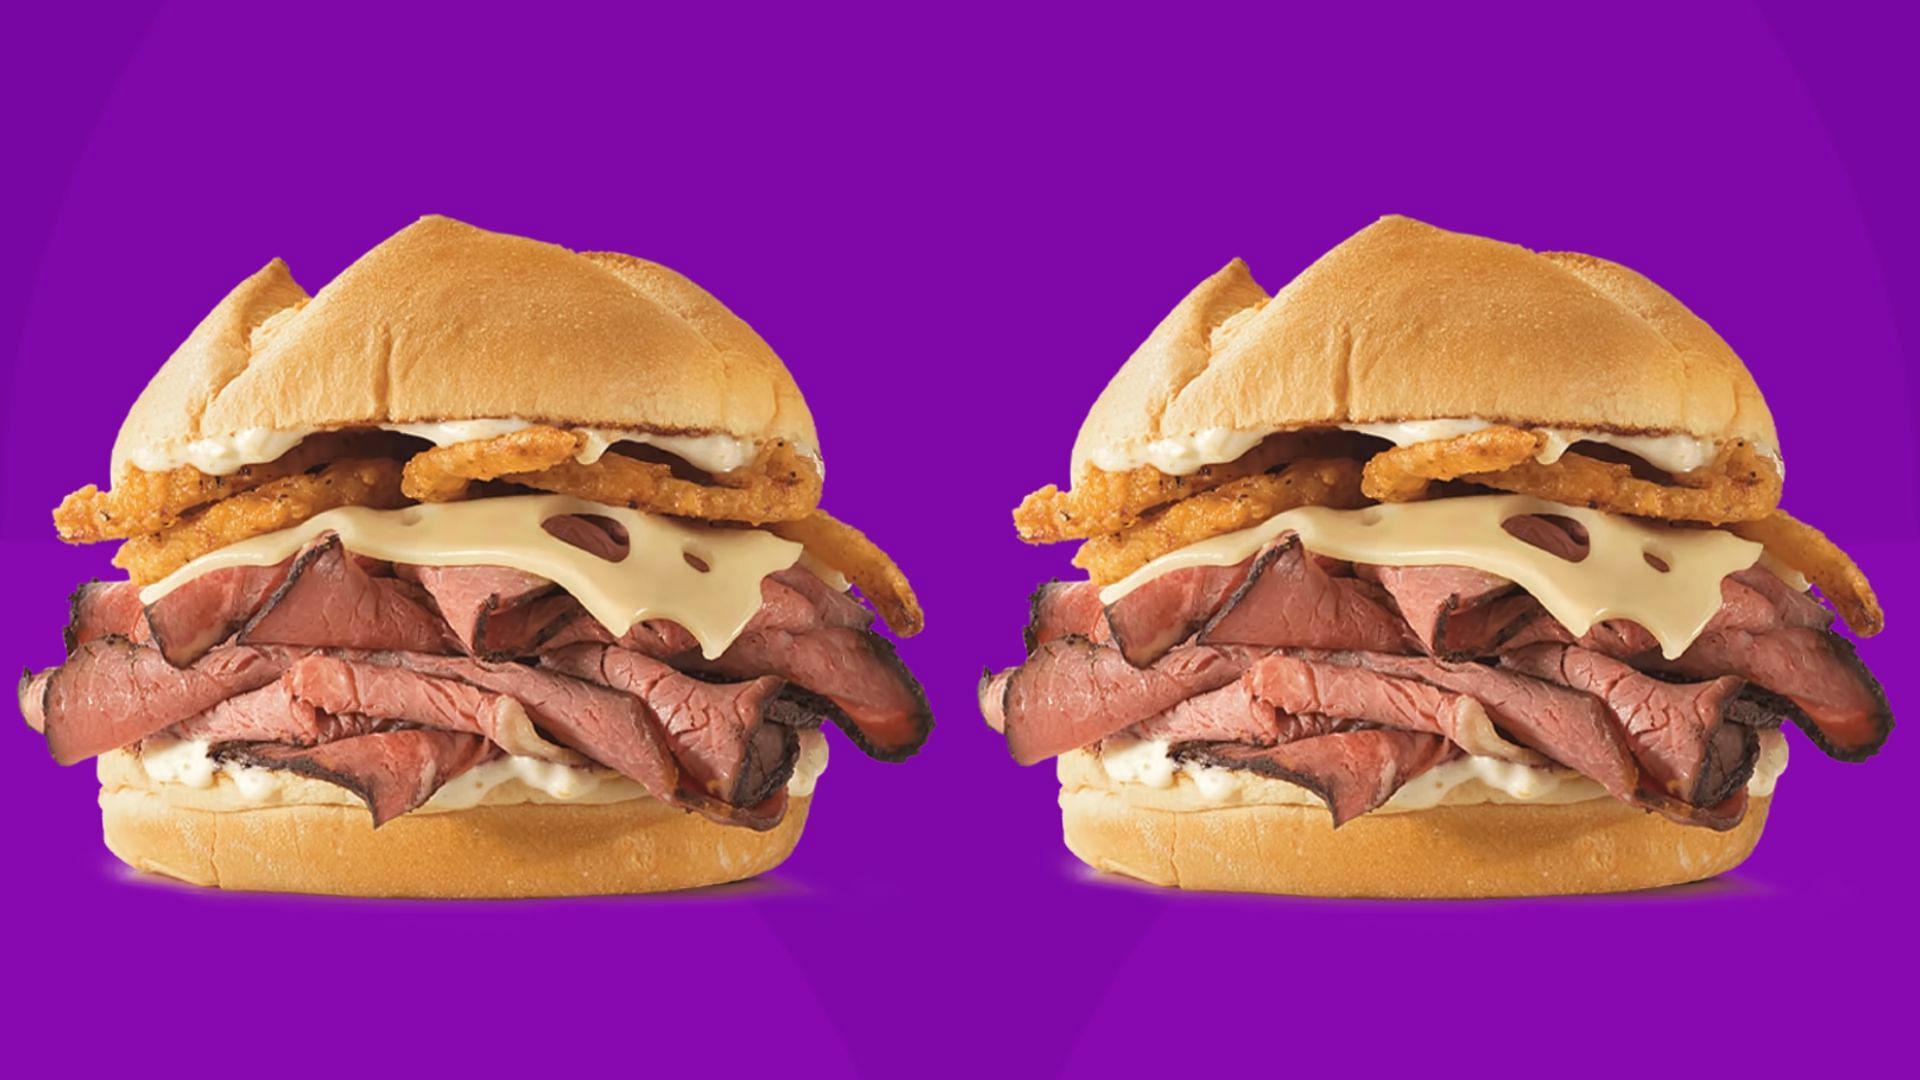 Arby’s launches new Steakhouse Garlic Ribeye Sandwich for a limited time